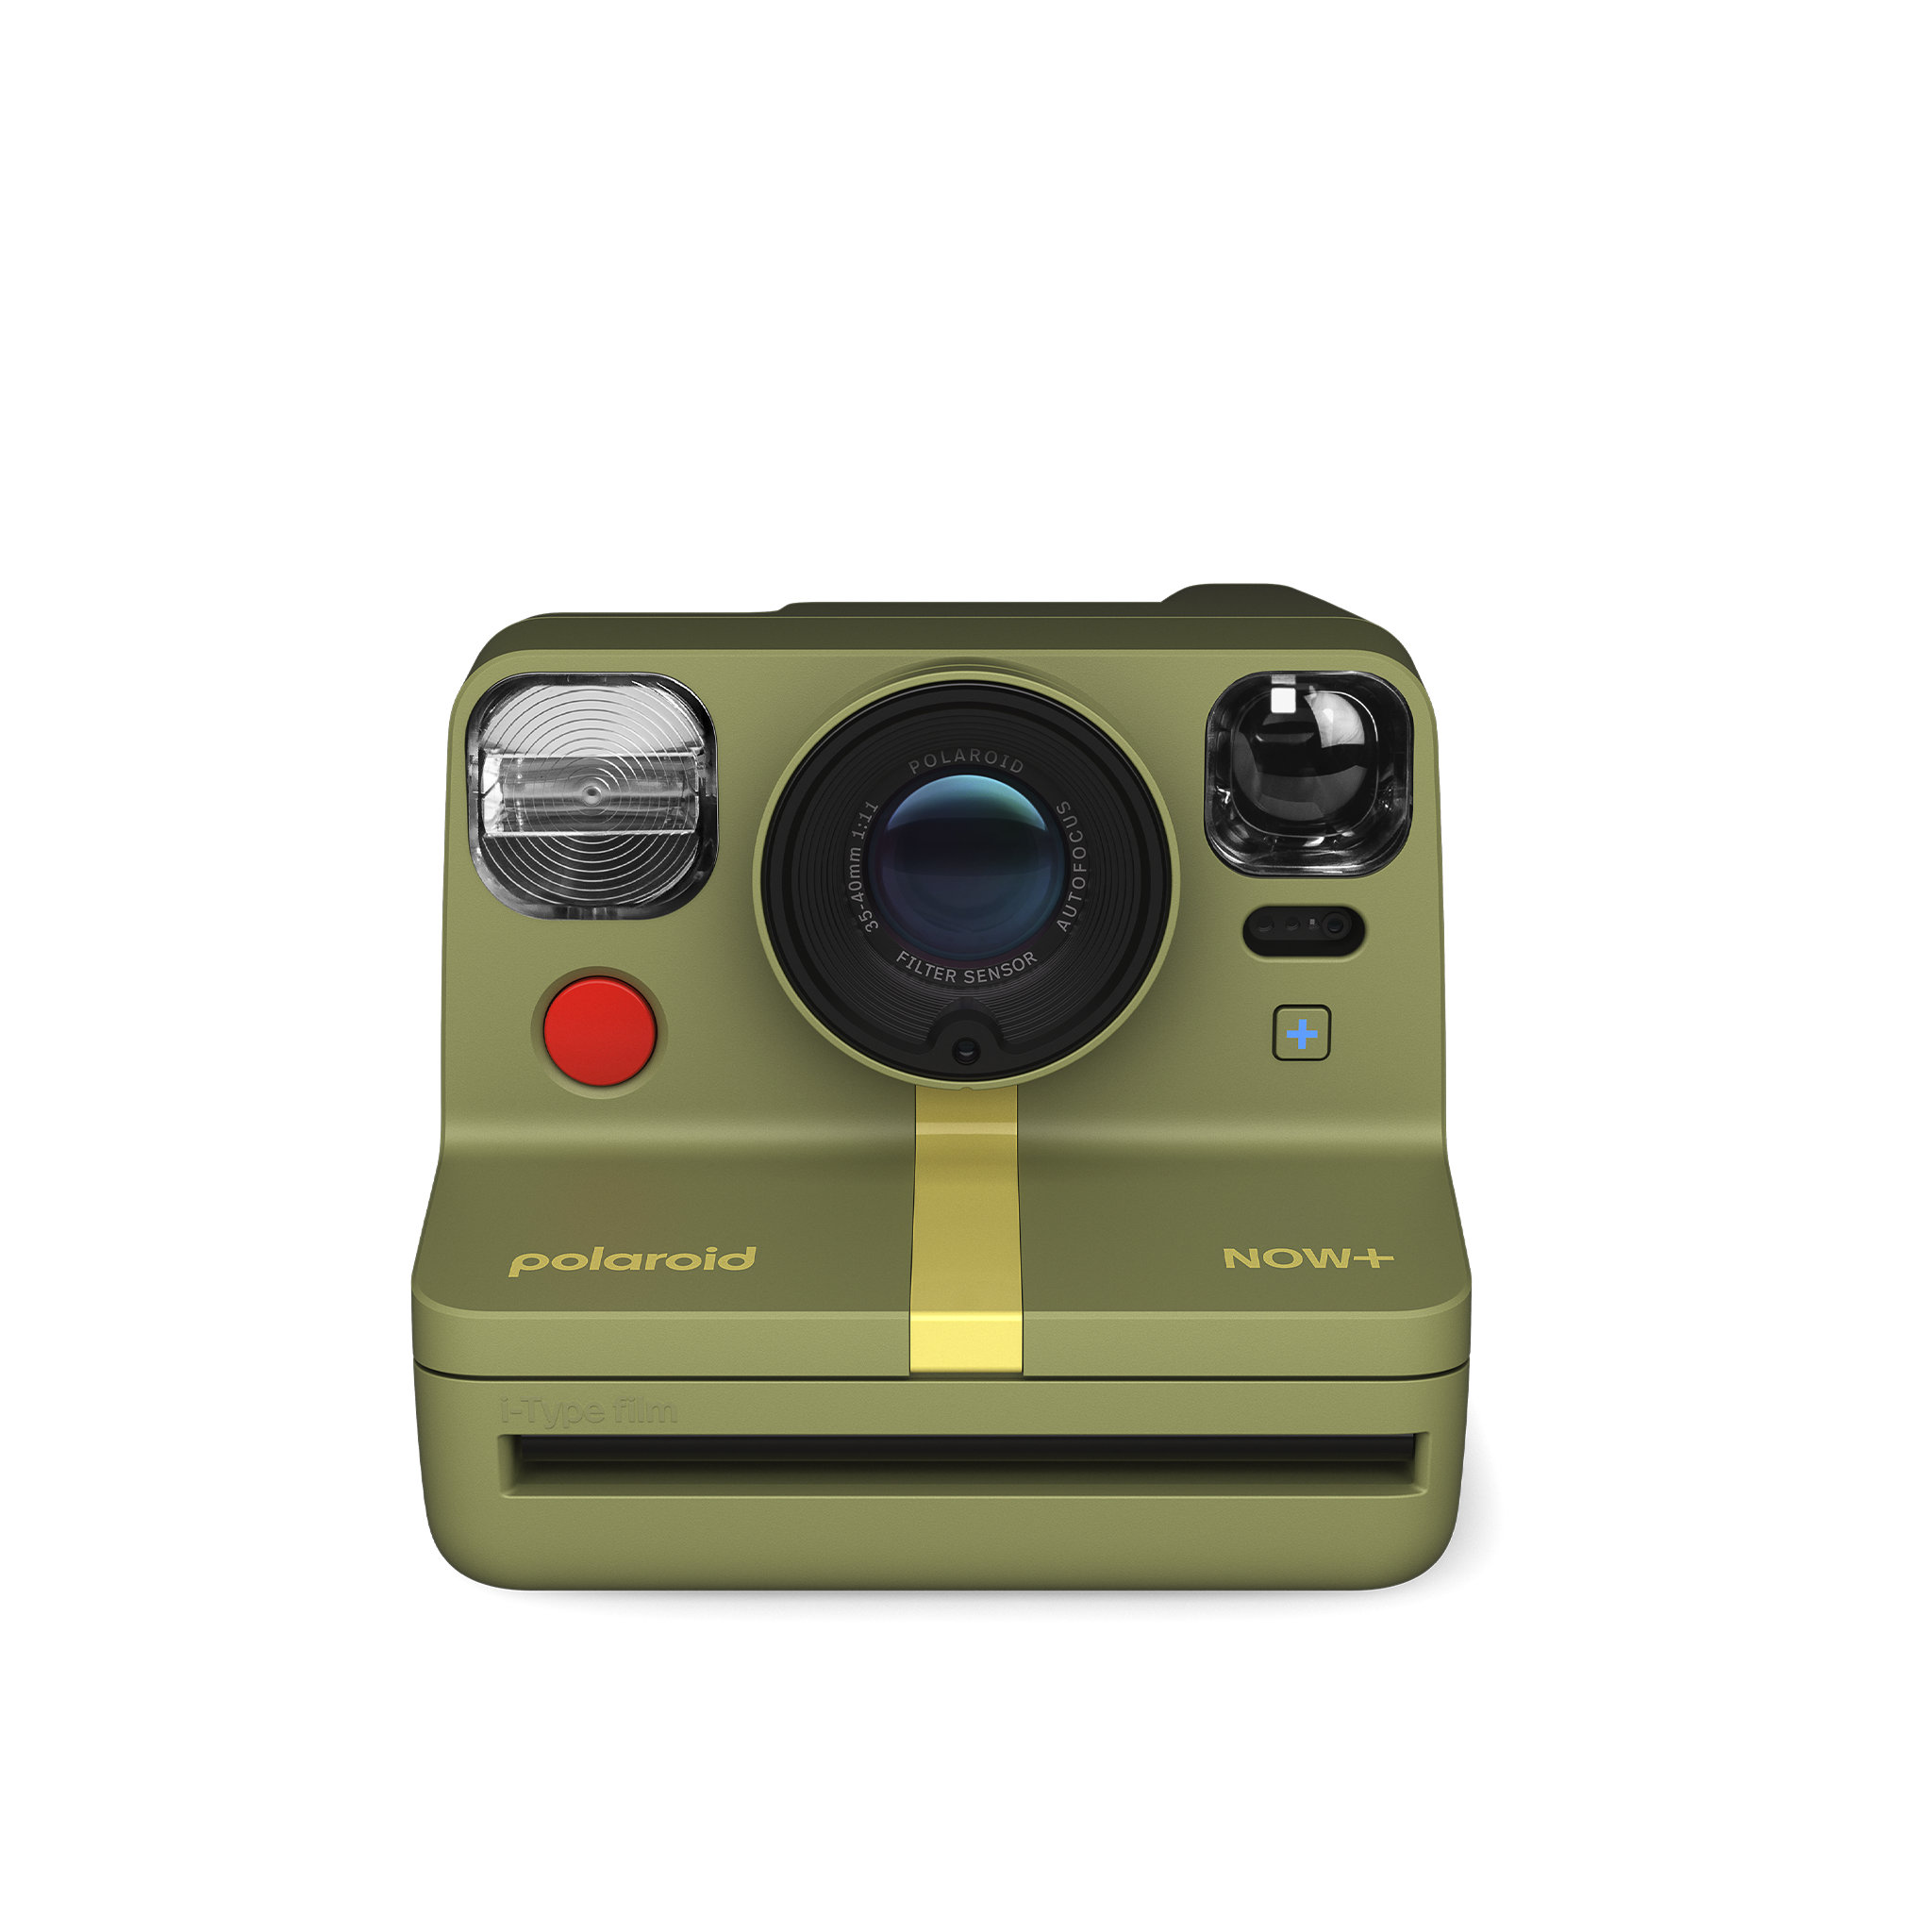 The Polaroid Now+ is only a slight update, but the add-ons are